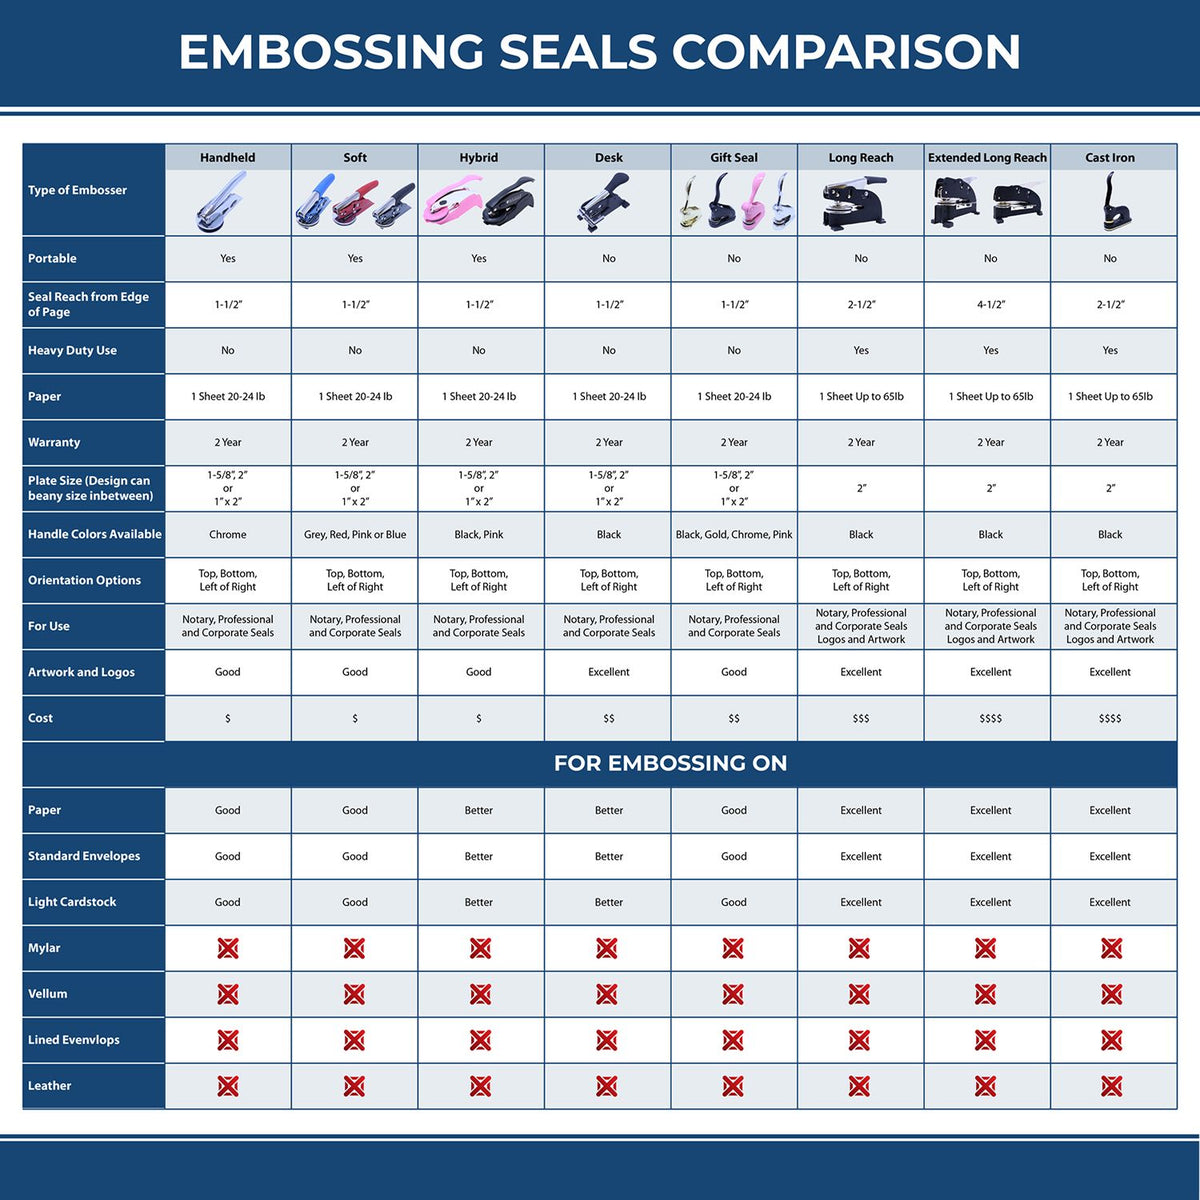 A comparison chart for the different types of mount models available for the Soft Pocket New Mexico Landscape Architect Embosser.